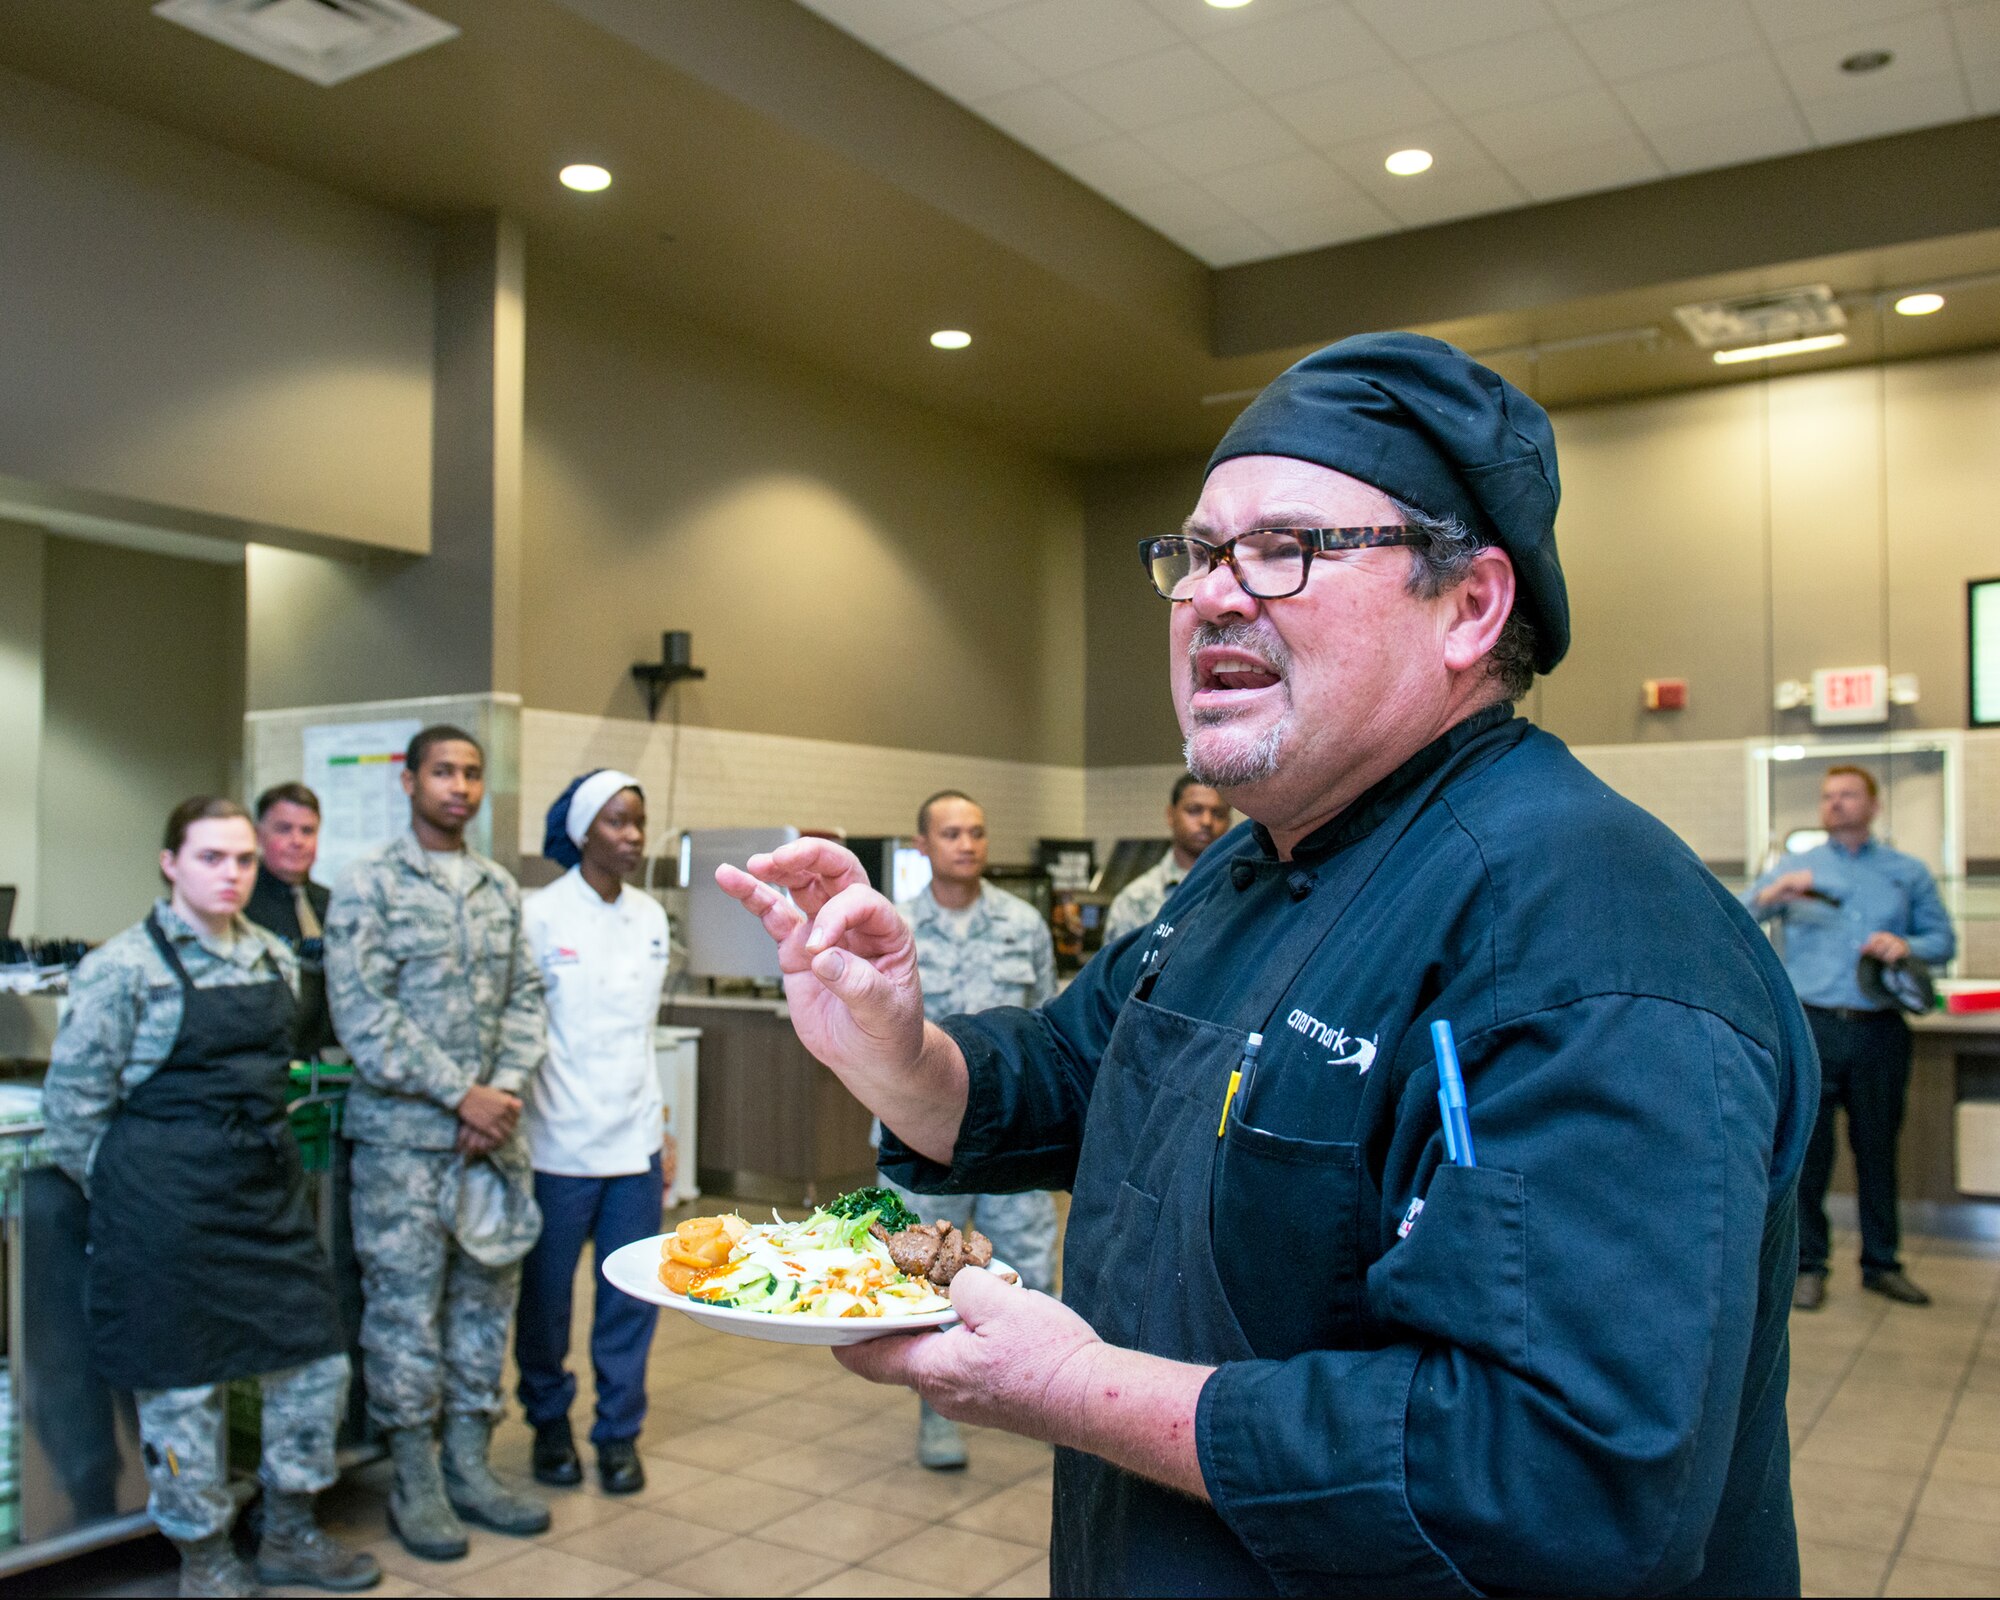 Maynard Oestreich, executive chef for Aramark explains his dish during the BIBIM Box tasting featuring Korean food at Sierra Inn Dining Facility, Travis Air Force Base, Calif., June 29, 2017. Oestreich a former U.S. Navy veteran and an award-winning chef from Napa Valley, Calif., took the head chef position so he could mentor young Airmen. (U.S. Air Force photo by Louis Briscese)